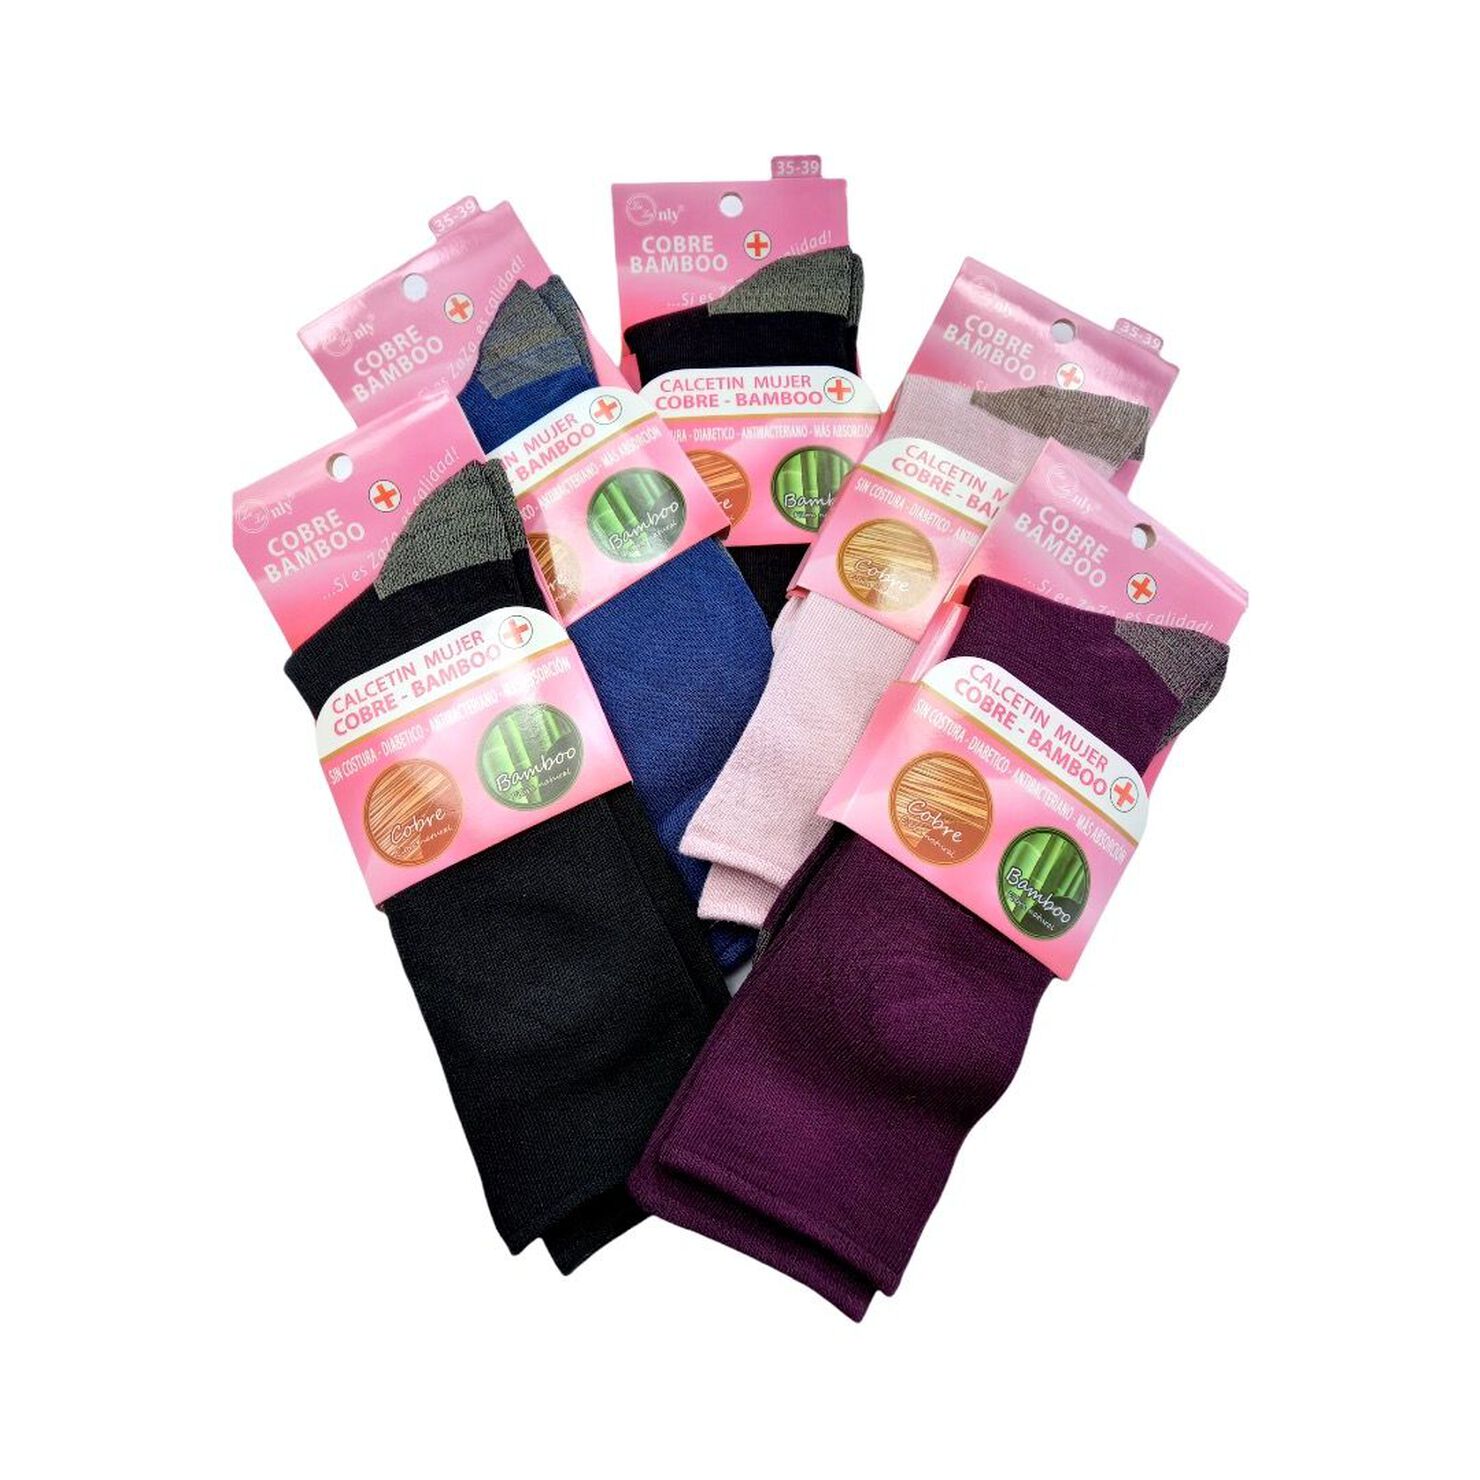 Calcetines Diabeticos Cobre Mujer pack 5 |